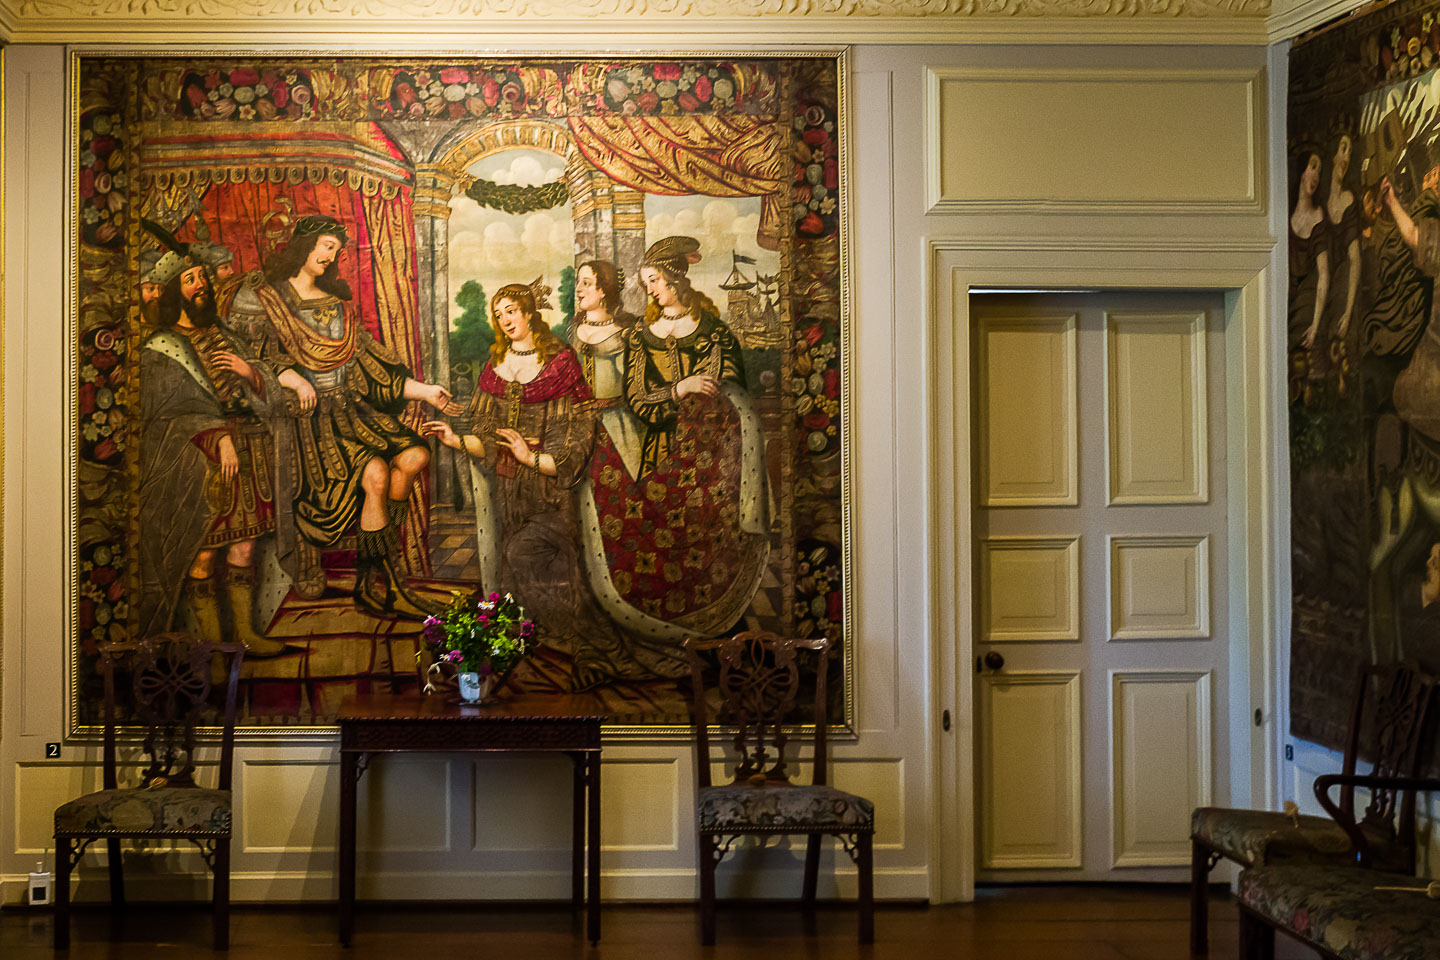 GB150182-2-E-Dunster-castle-The-famous-leather-Tapestries.jpg